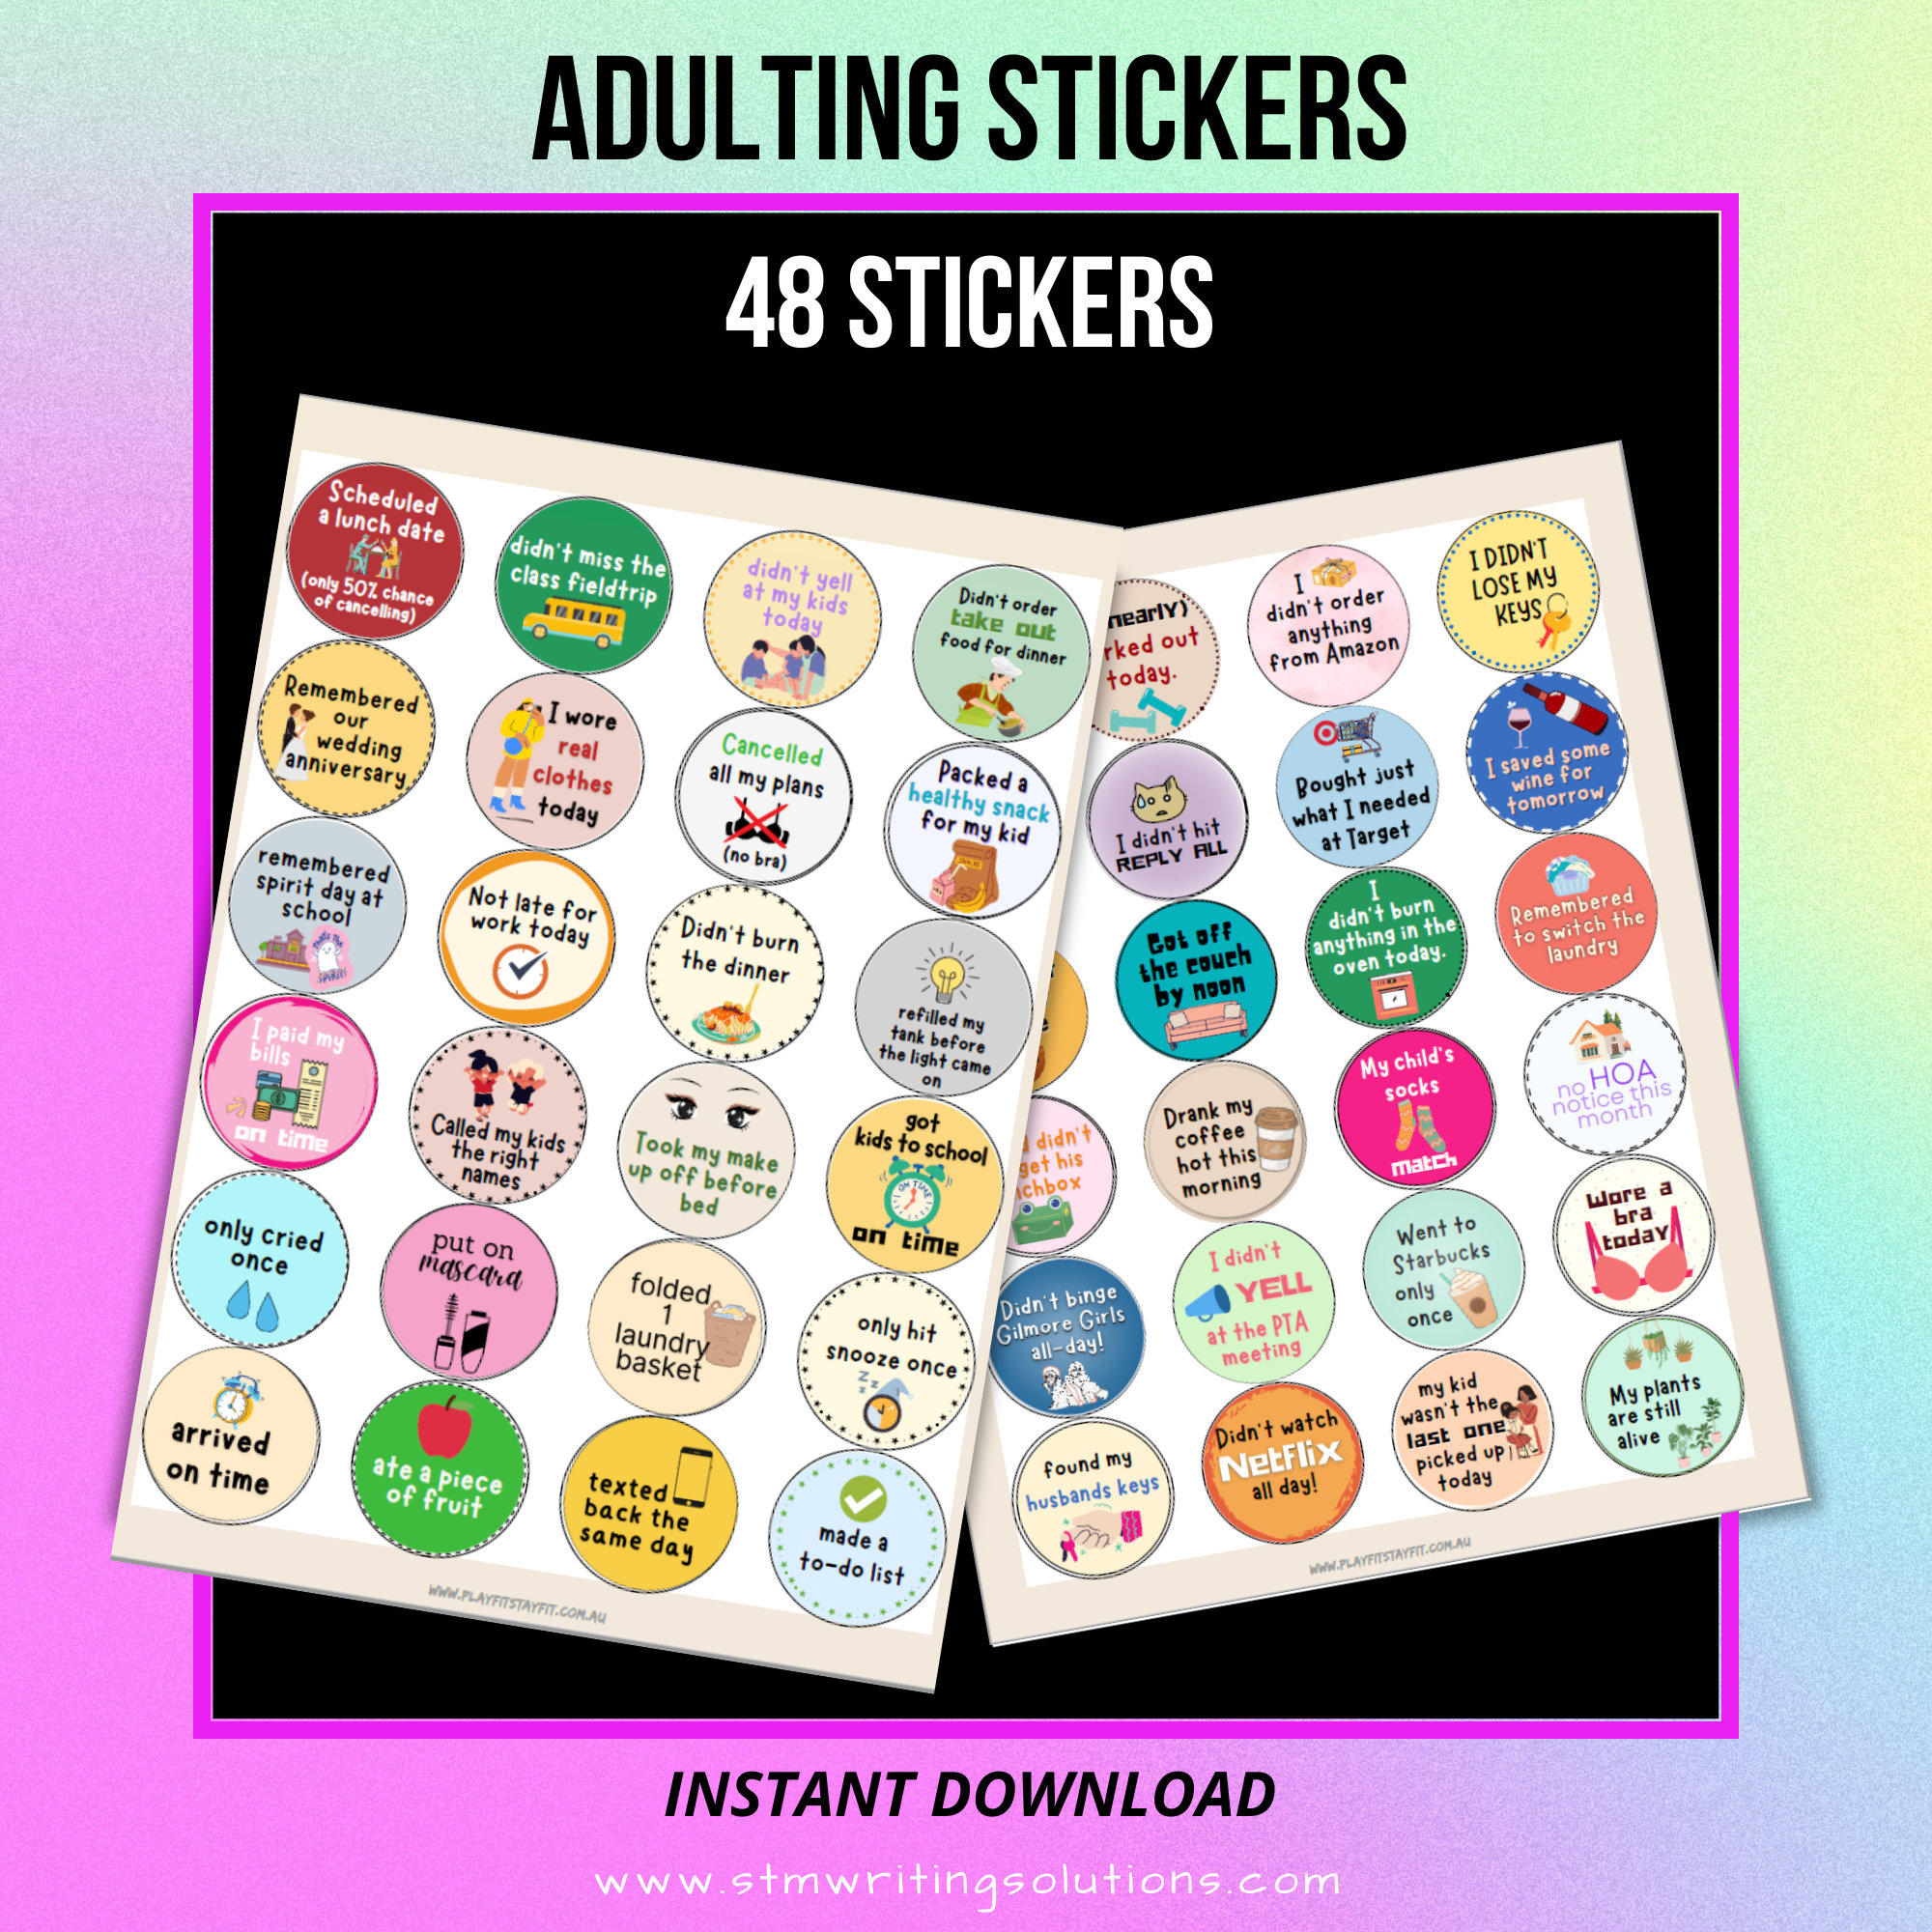 Printable Adult Stickers / Printable Stickers / Funny Stickers for